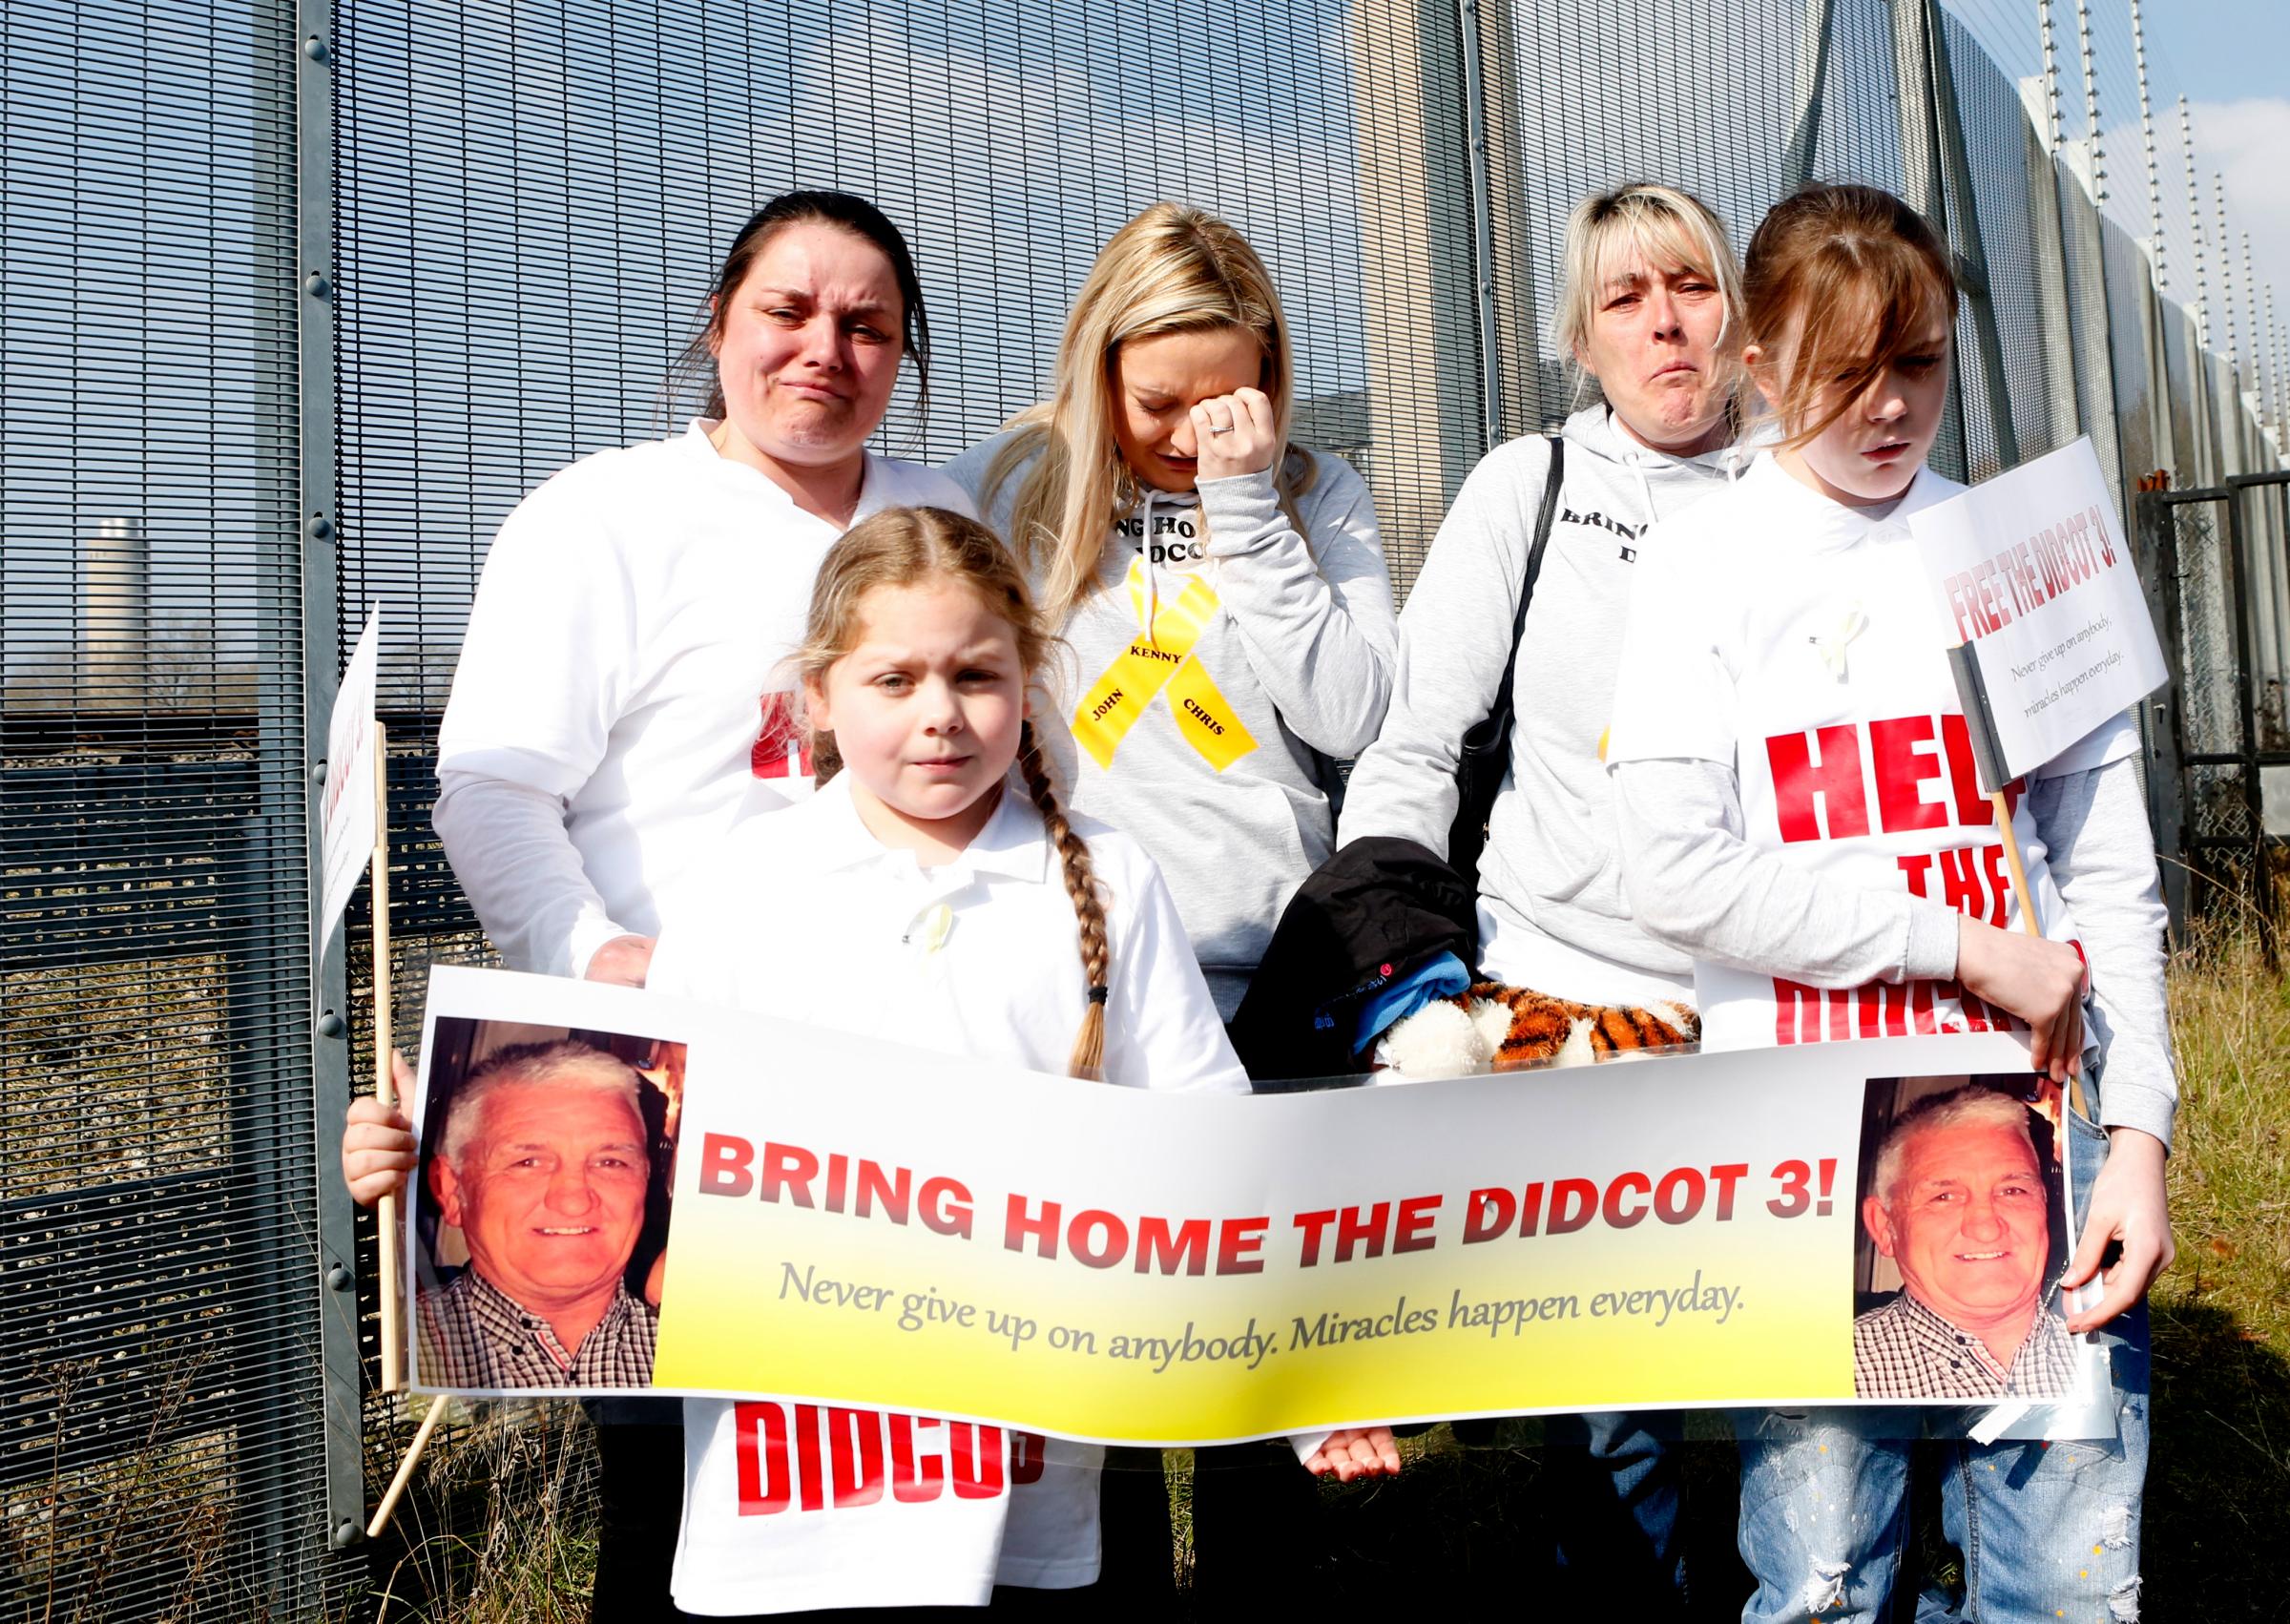 Relatives of Mr Cresswell outside Didcot Power Station in March 2016, in the wake of the tragedy Picture: UKNIP